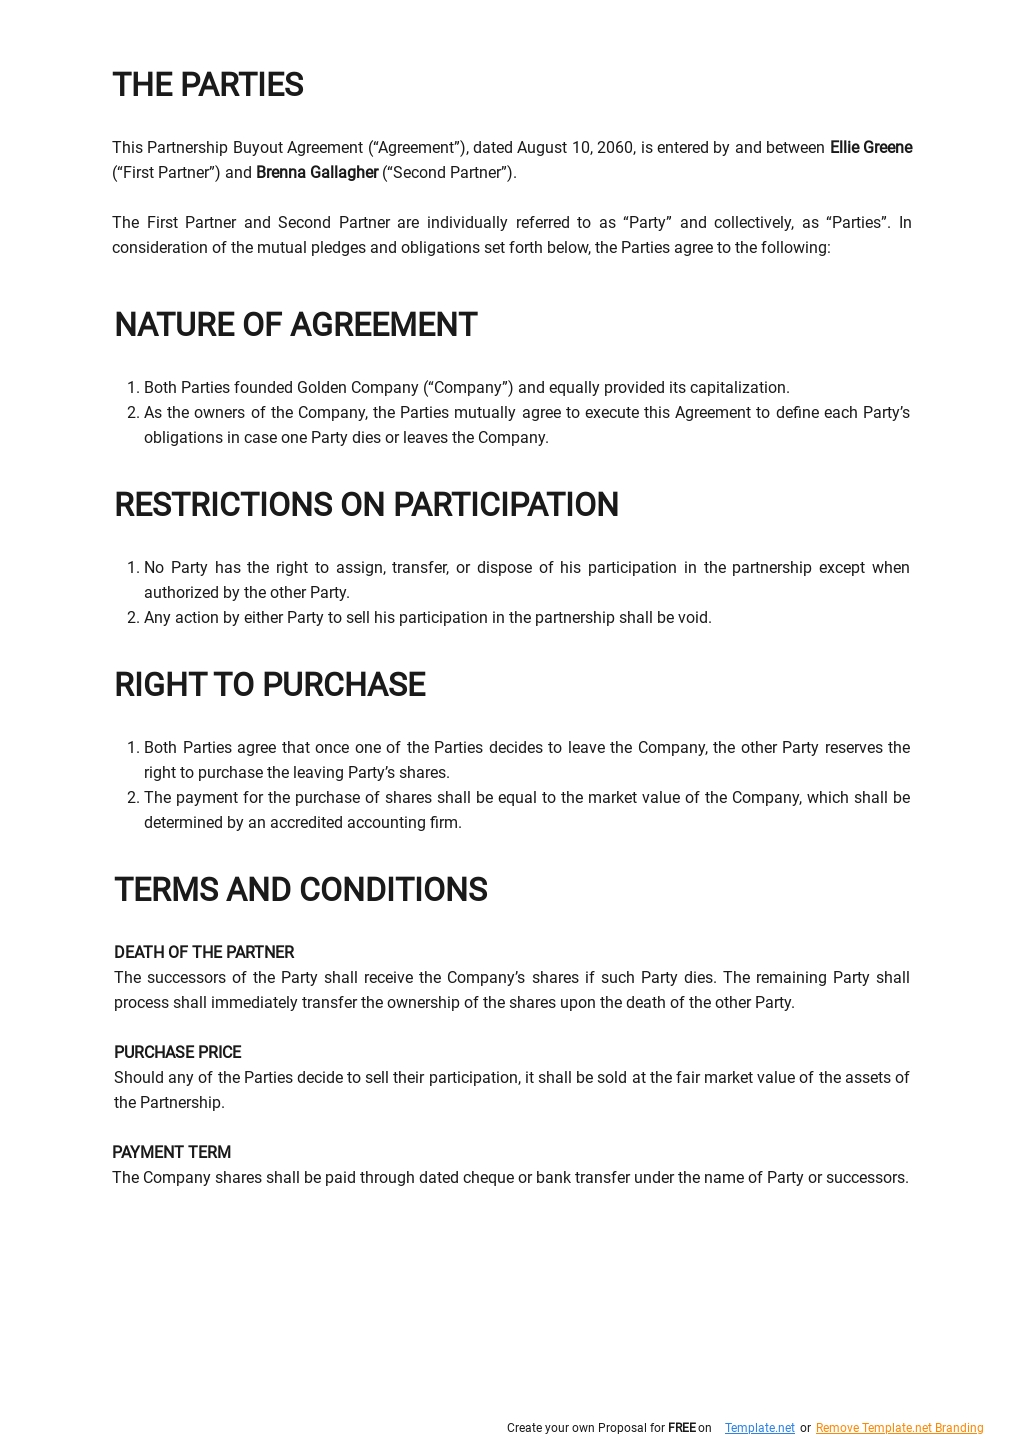 Partnership Buyout Agreement Template in Google Docs, Word